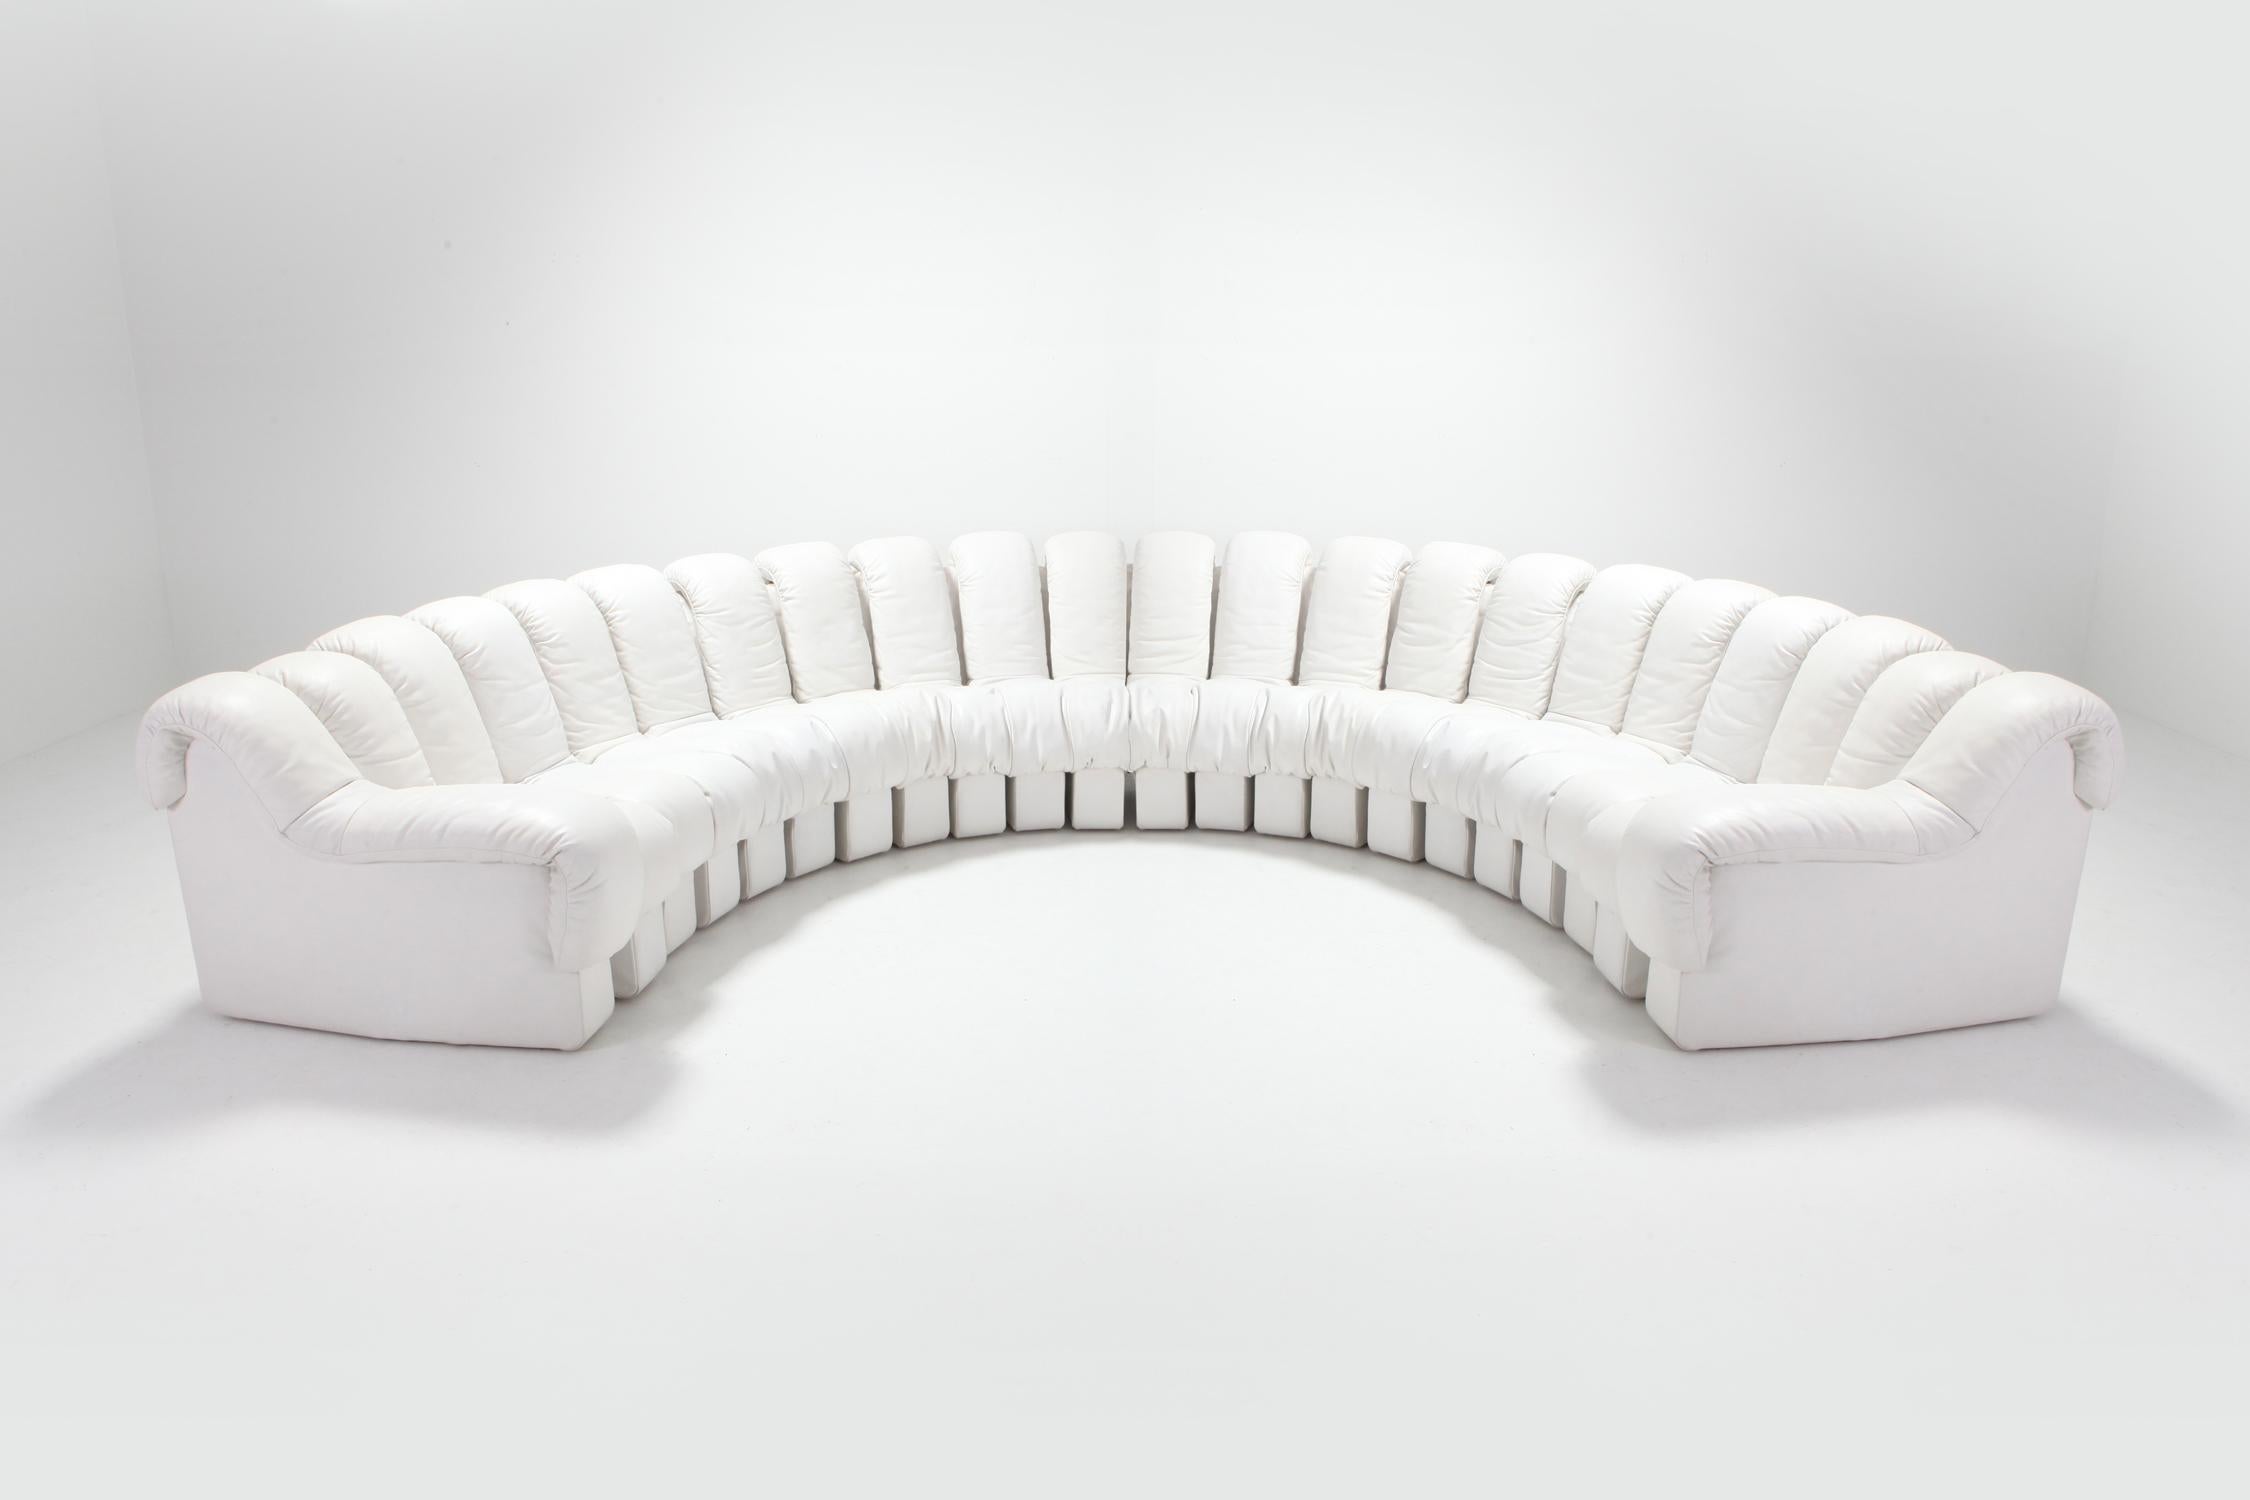 De Sede created this gorgeous non stop 'Snake' couch in the 1970s.
Designer Ueli Berger, E. Peduzzi-Riva, Heinz Ulrich & Klaus Vogt
Named after a mythical alpine creature, the Tatzelwurm.
Consisting of 22 elements in ivory white top quality